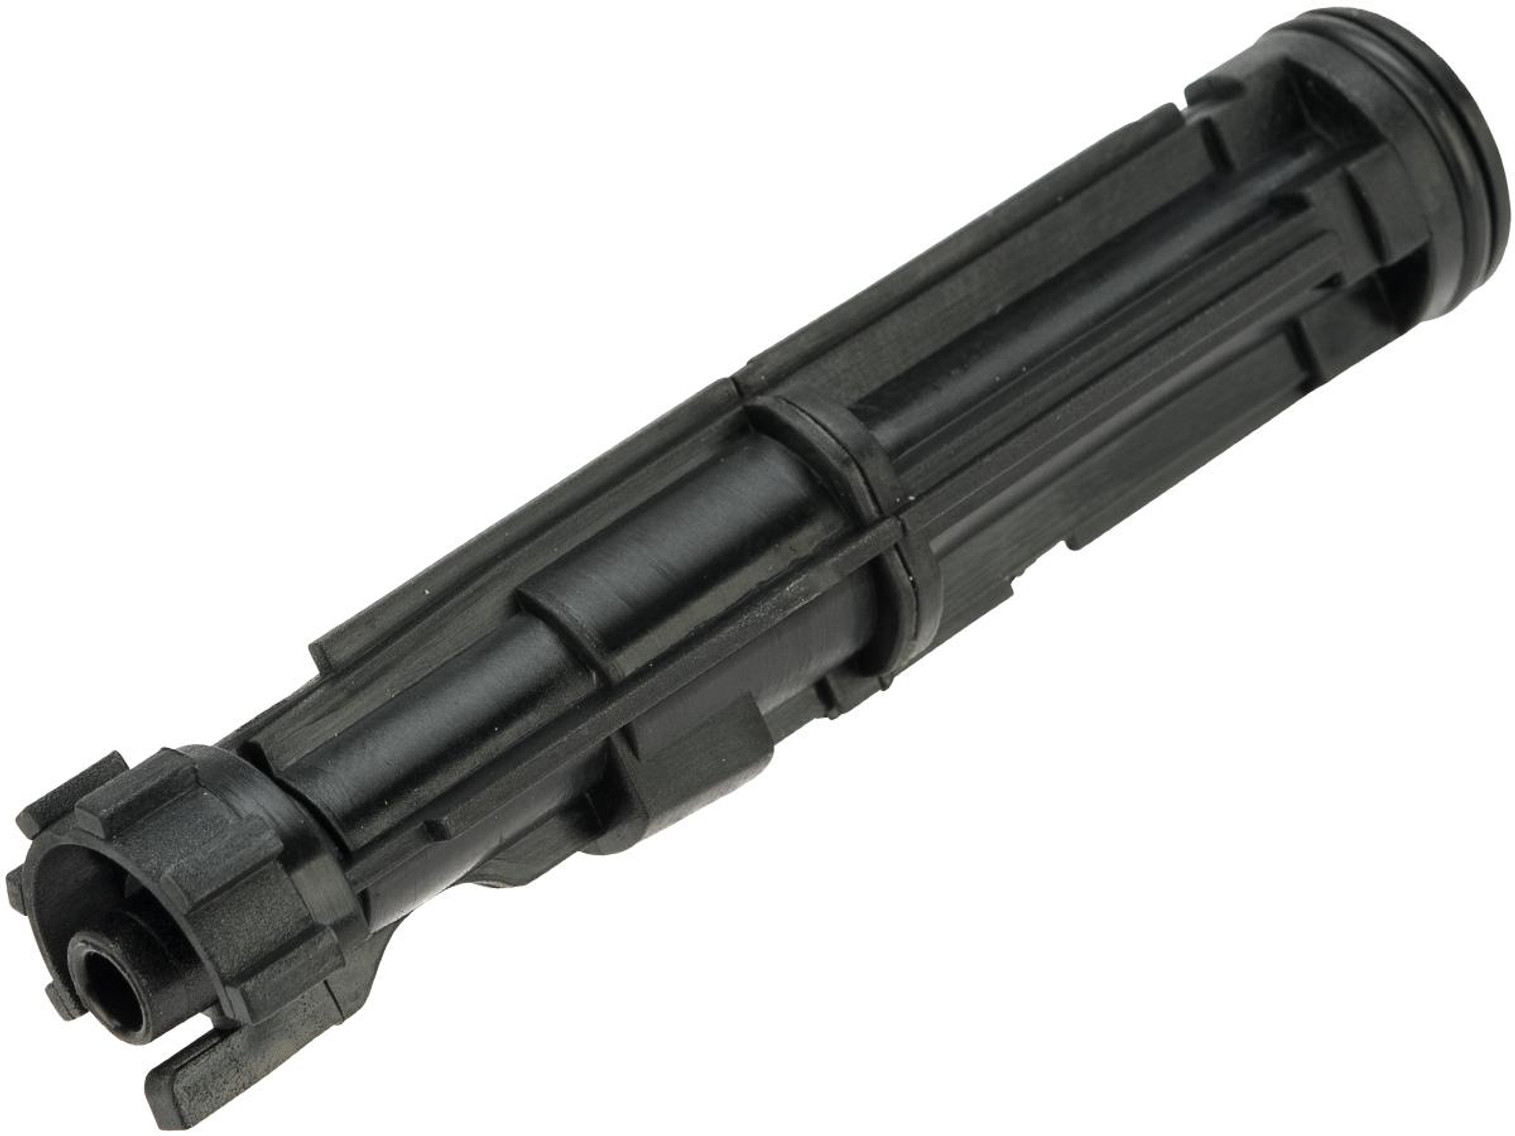 Angry Gun Muzzle Power (MPA) Loading Nozzle For WE-Tech Gas Powered Rifles (Model: M4 / L85 / MSK)